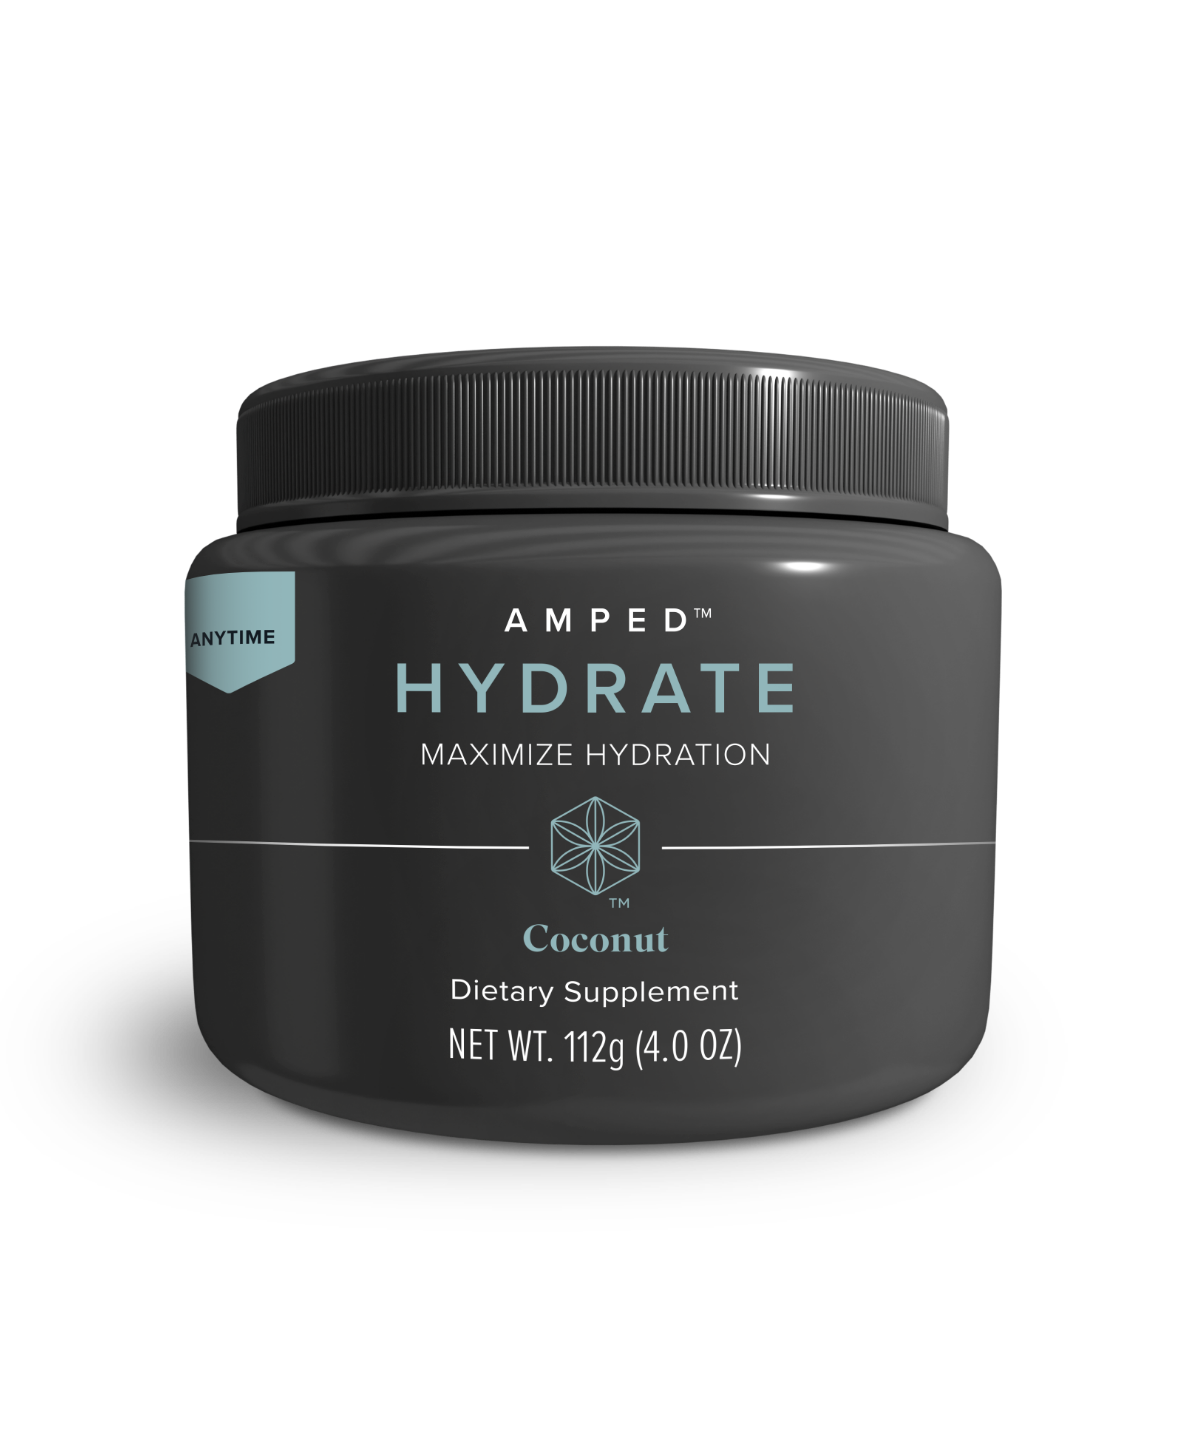 AMPED™ Hydrate Coconut Canister